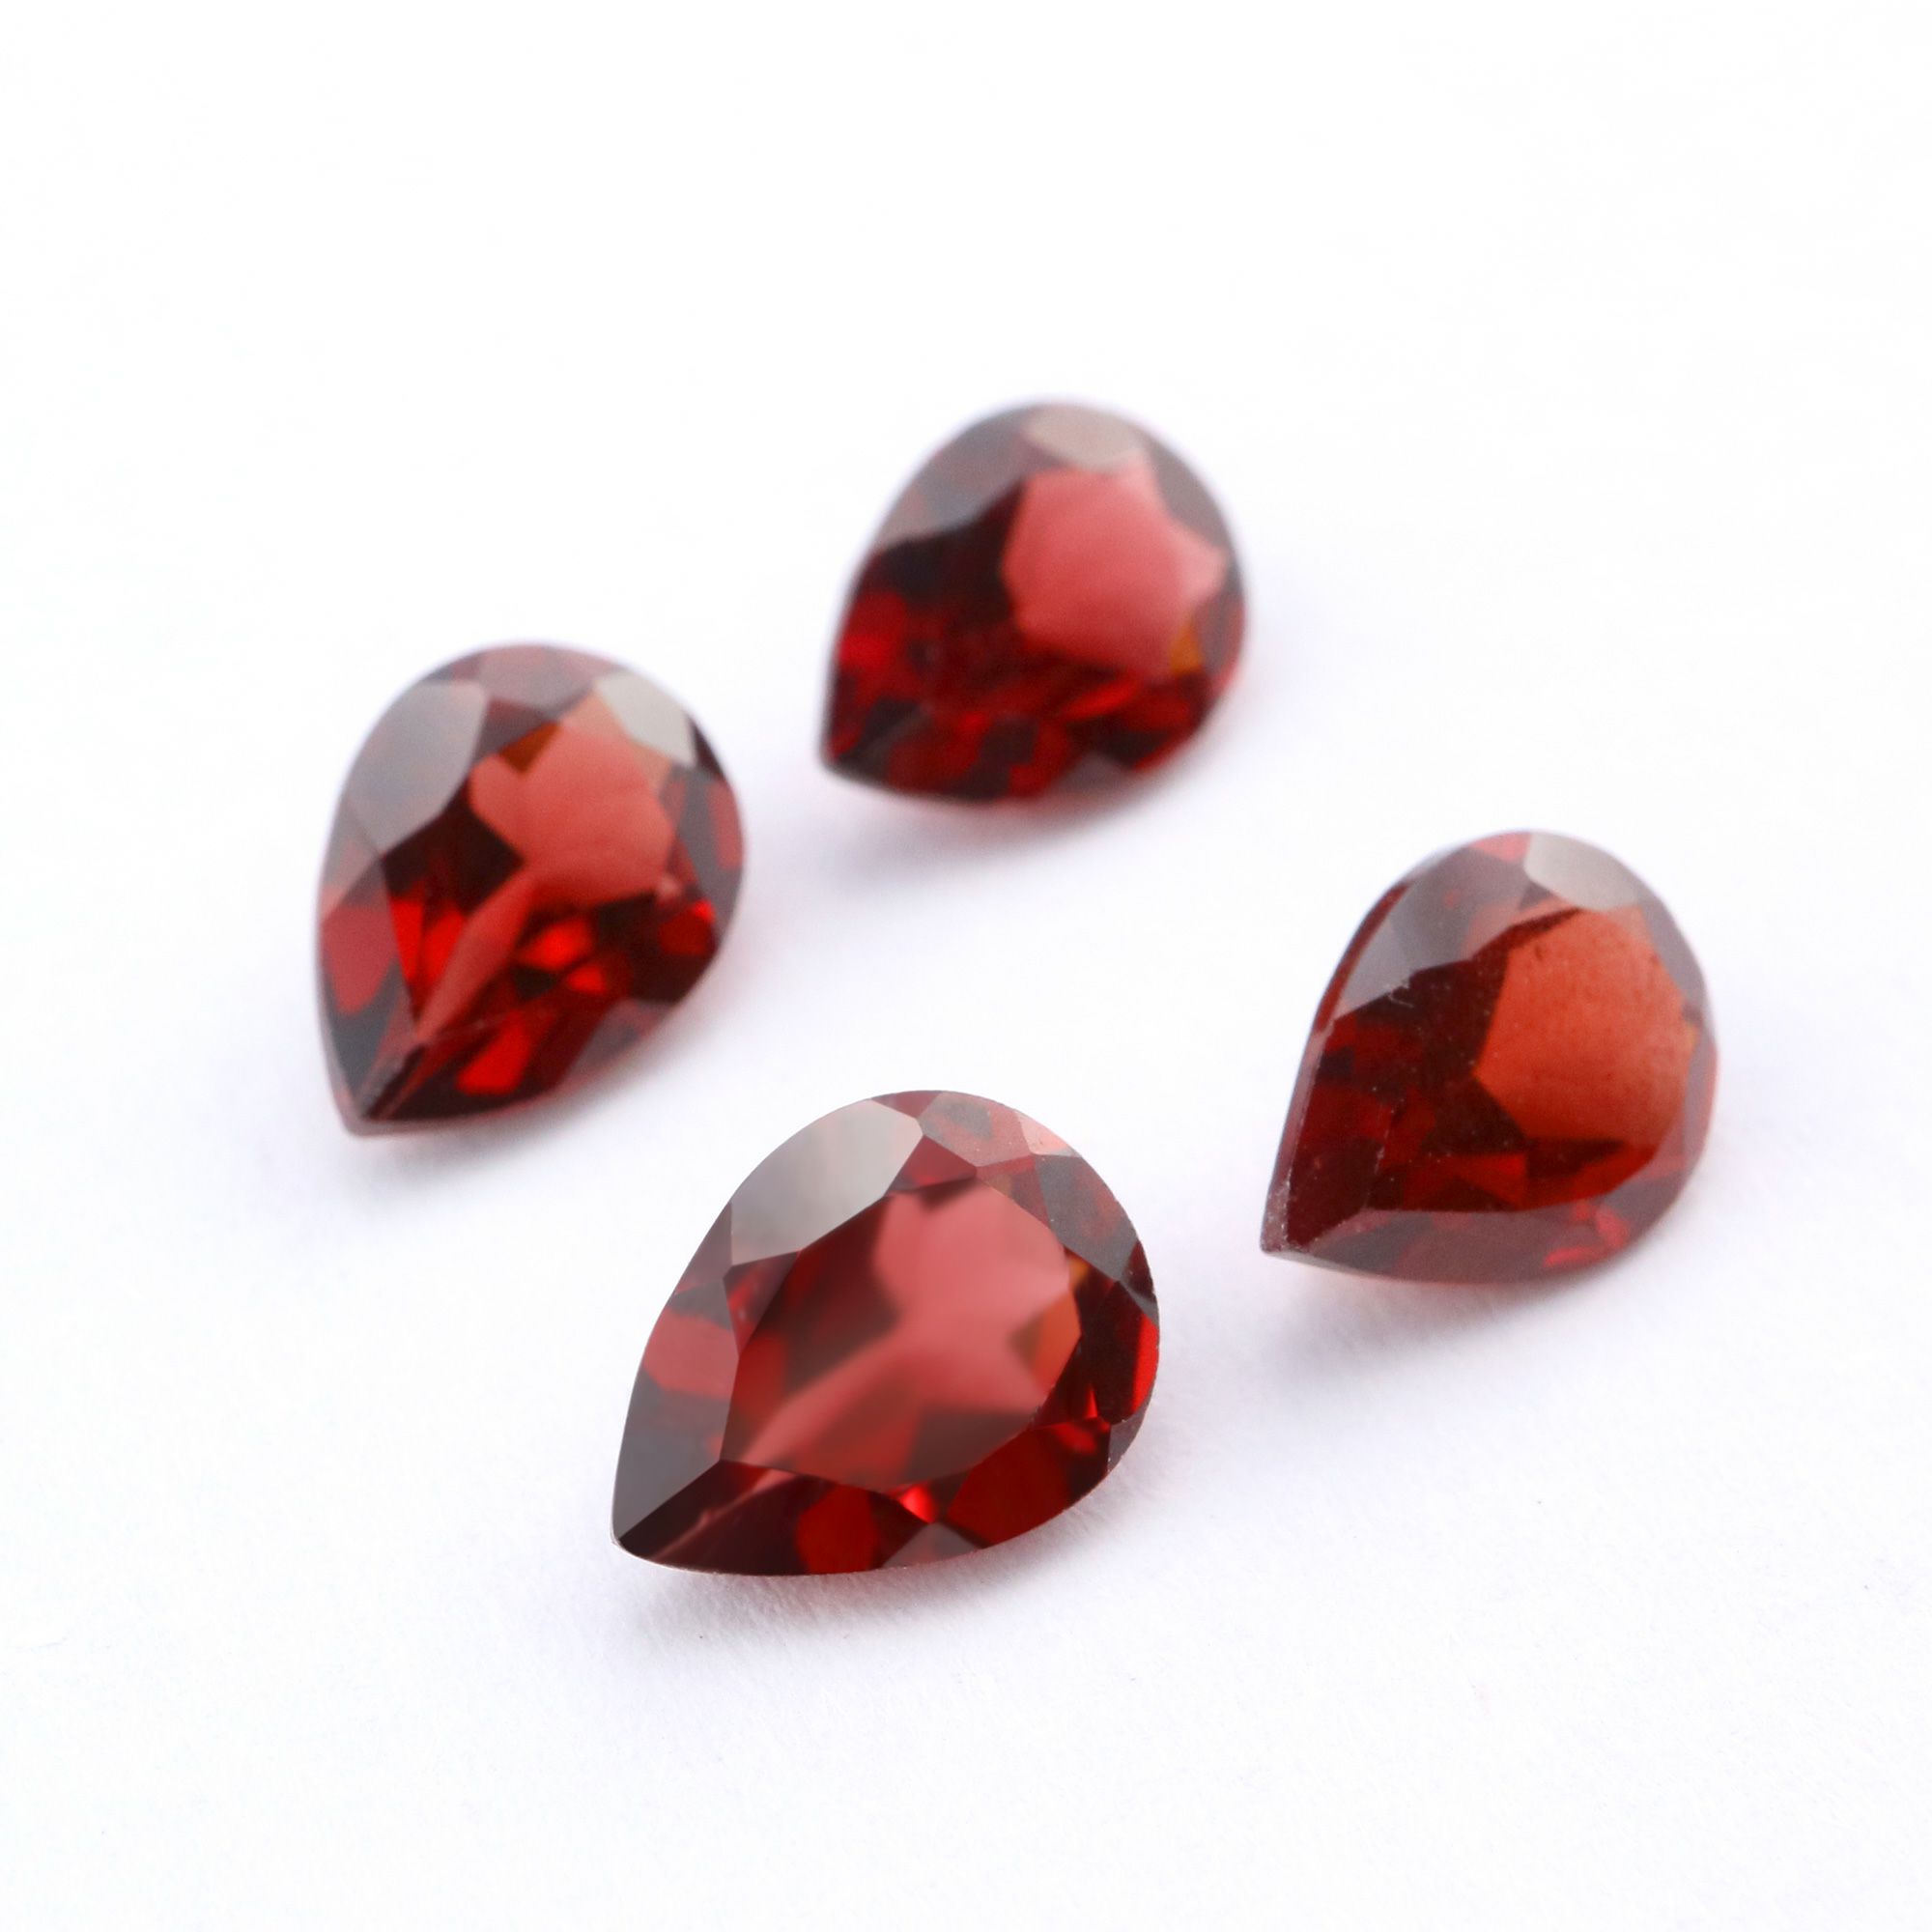 1Pcs Natural Red Garnet January Birthstone Pear Faceted Loose Gemstone Nature Semi Precious Stone DIY Jewelry Supplies 4150010 - Click Image to Close